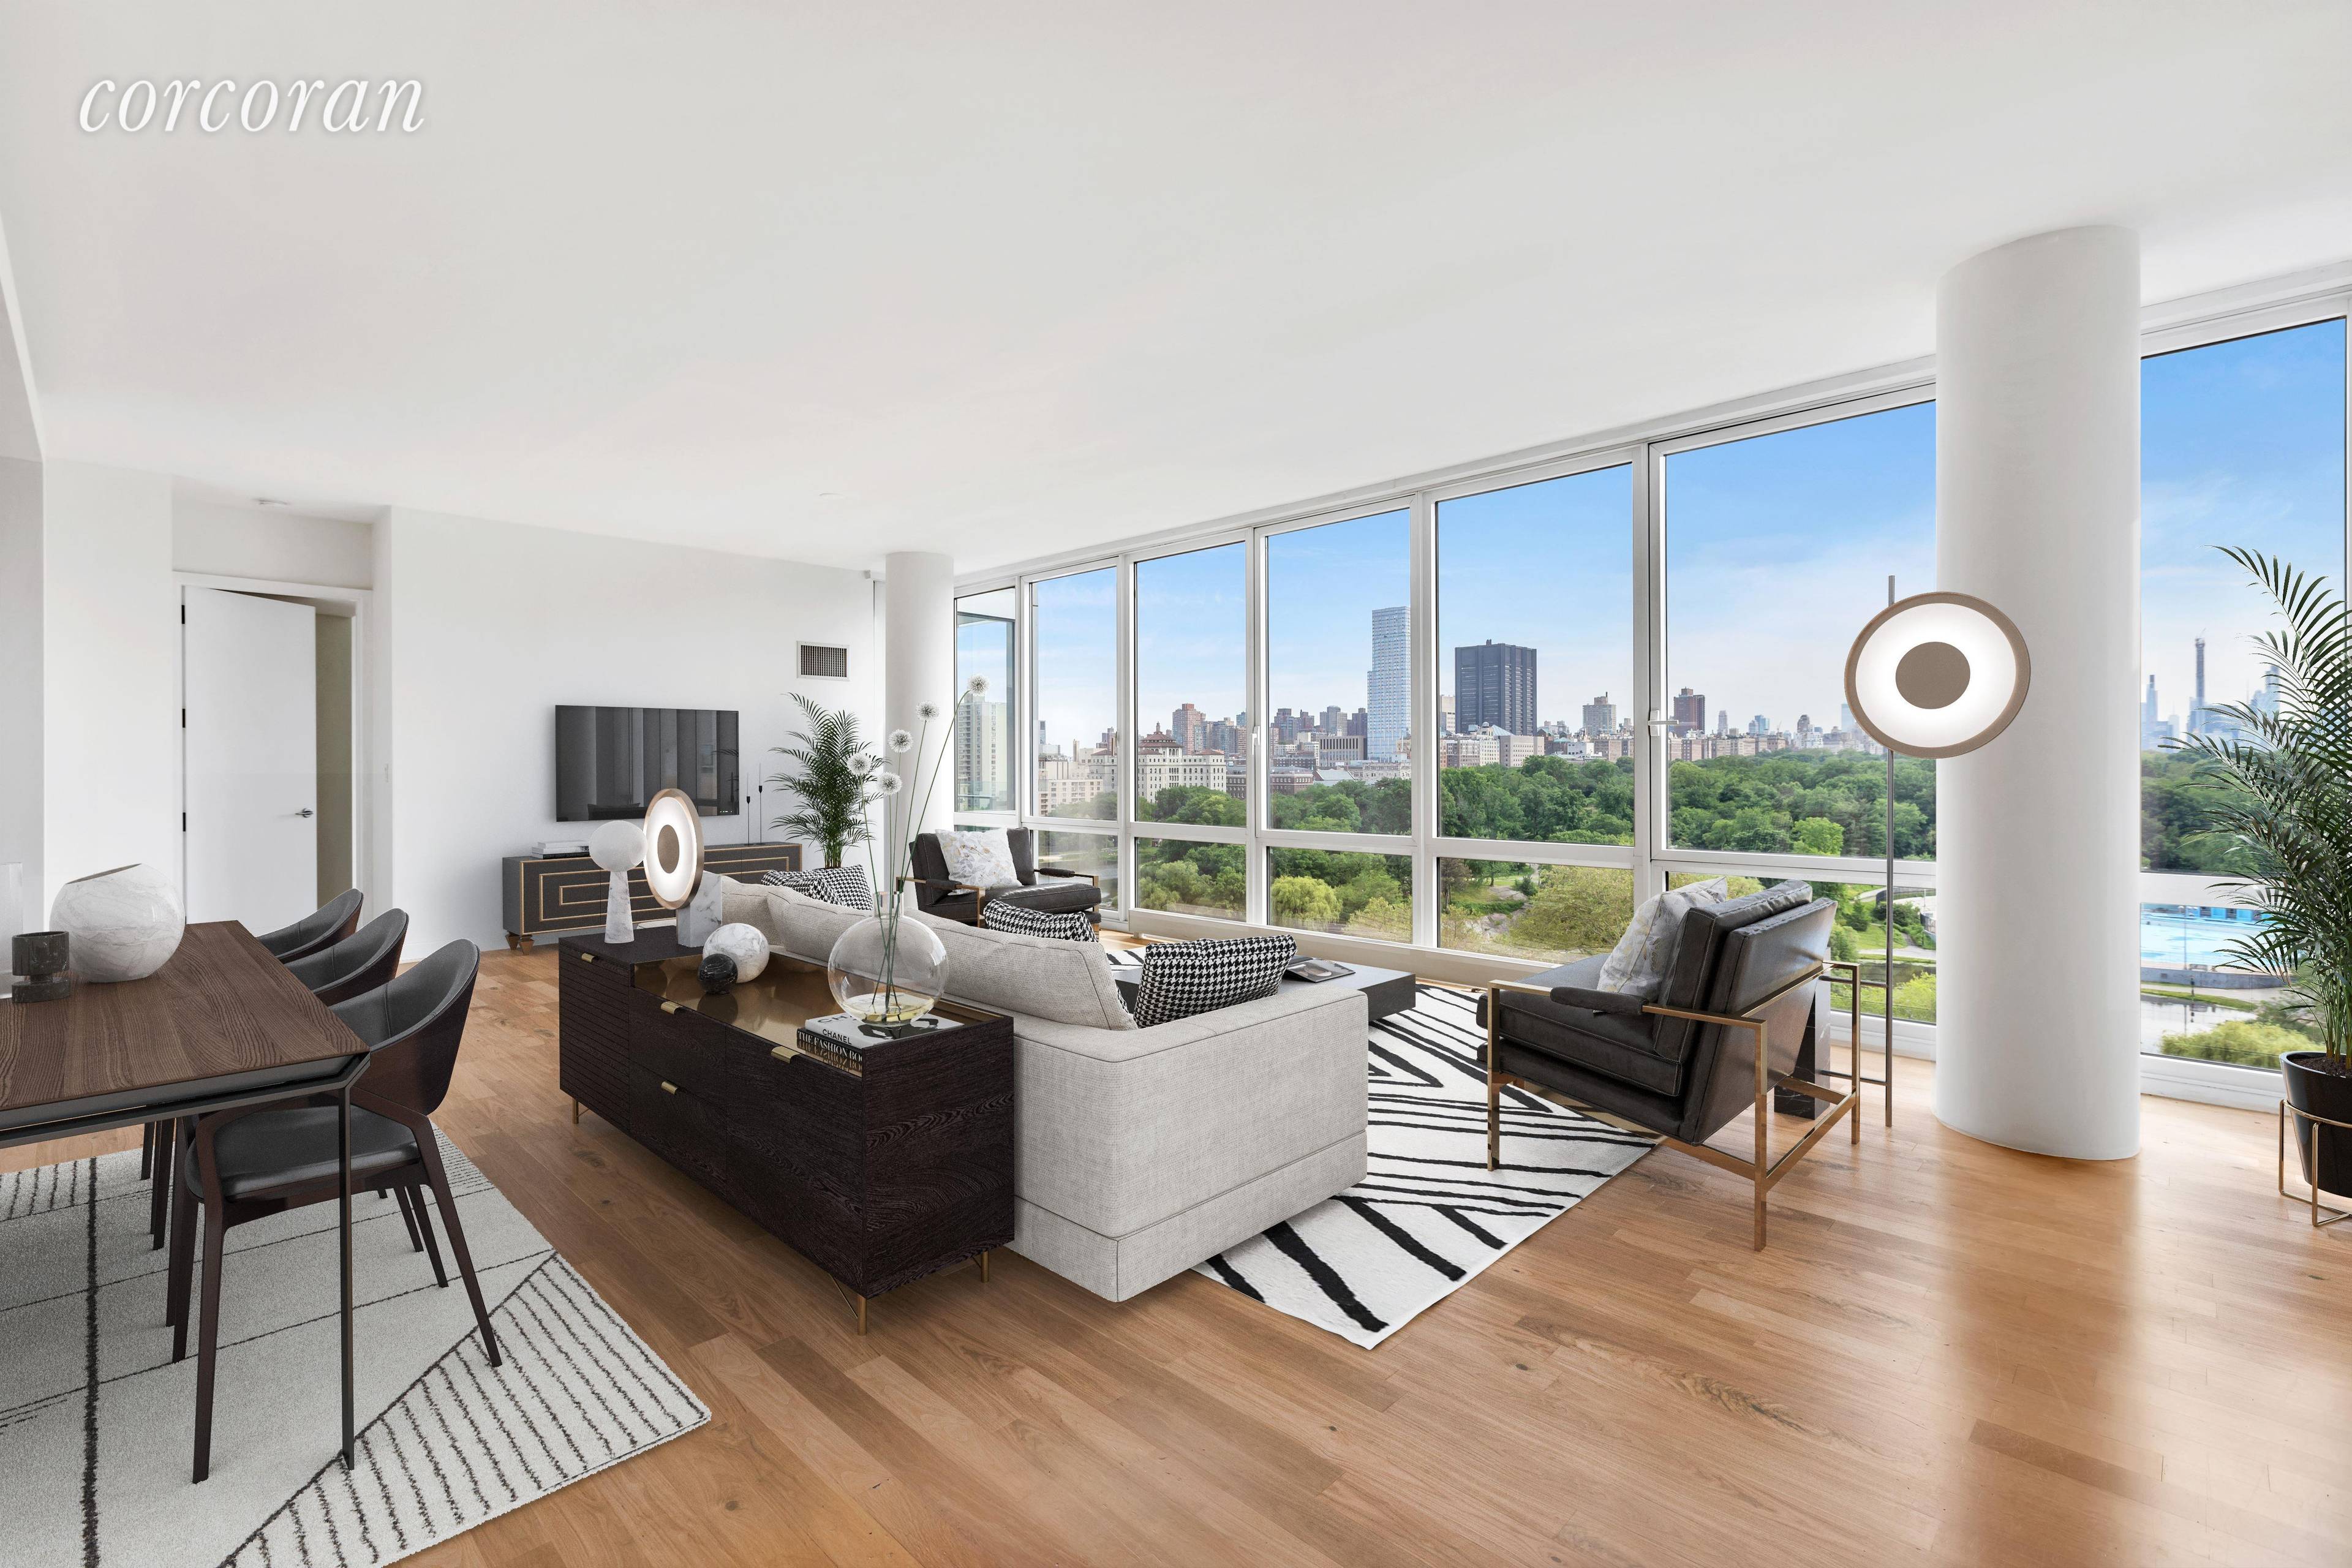 Entering this bright split two bedroom and two and a half bathroom residence, Central Park views through the floor to ceiing windows become the immediate focal point.